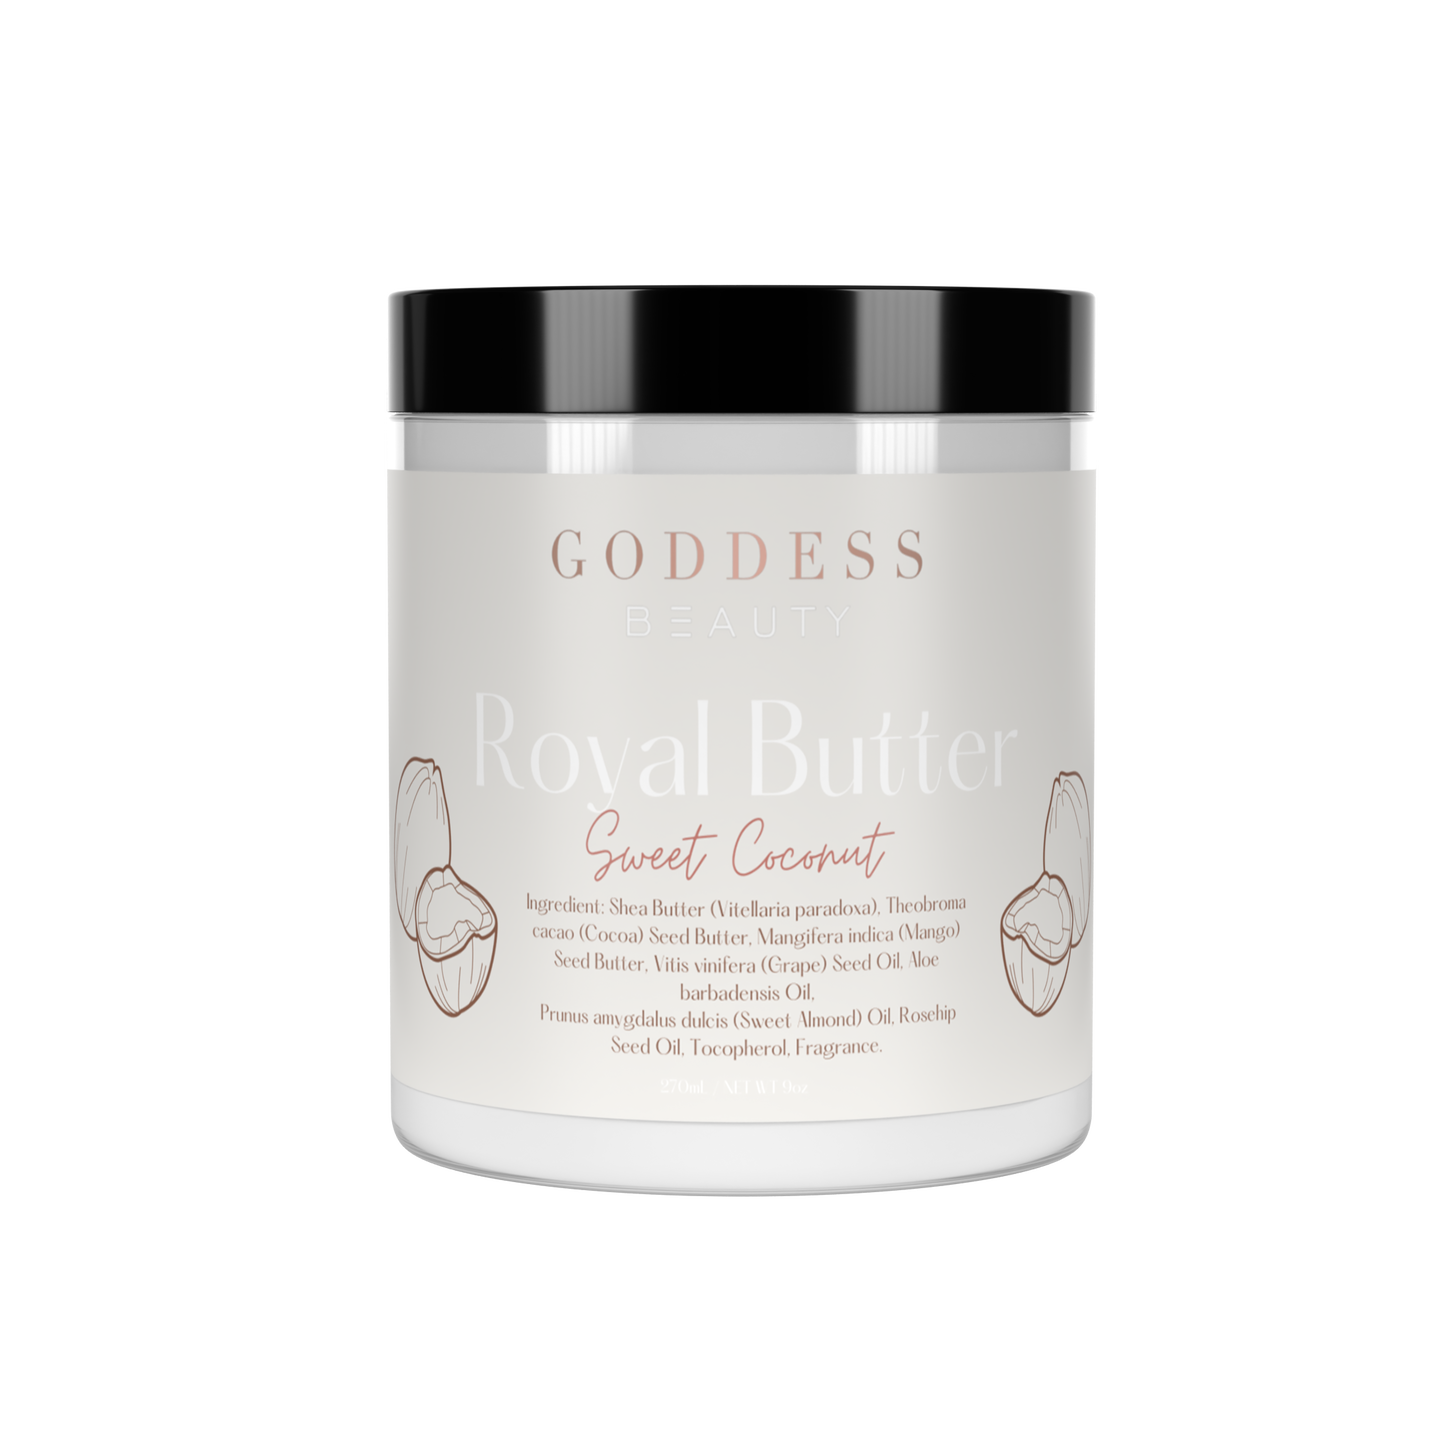 Sweet Coconut Royal Body Butter